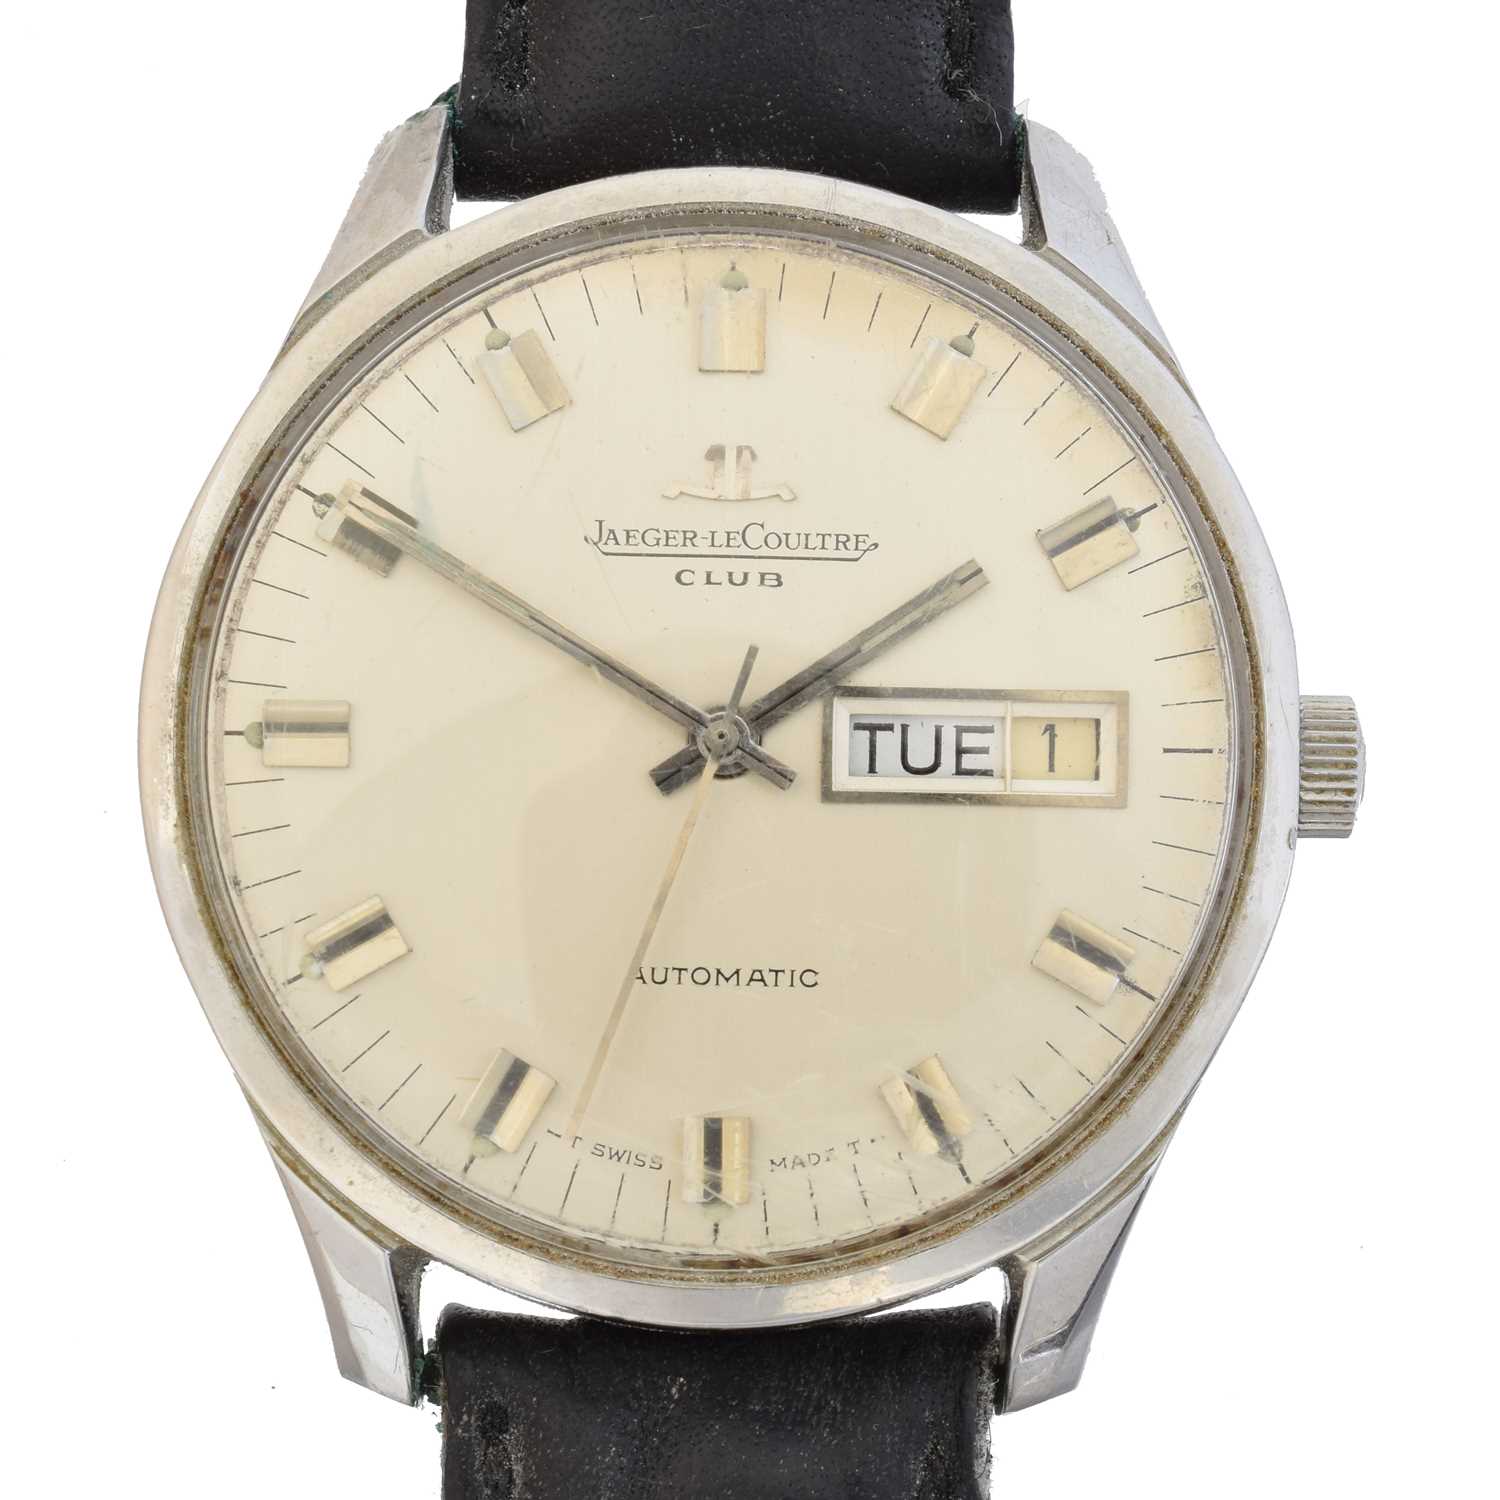 Lot 115 - A Jaeger-LeCoultre Club automatic watch